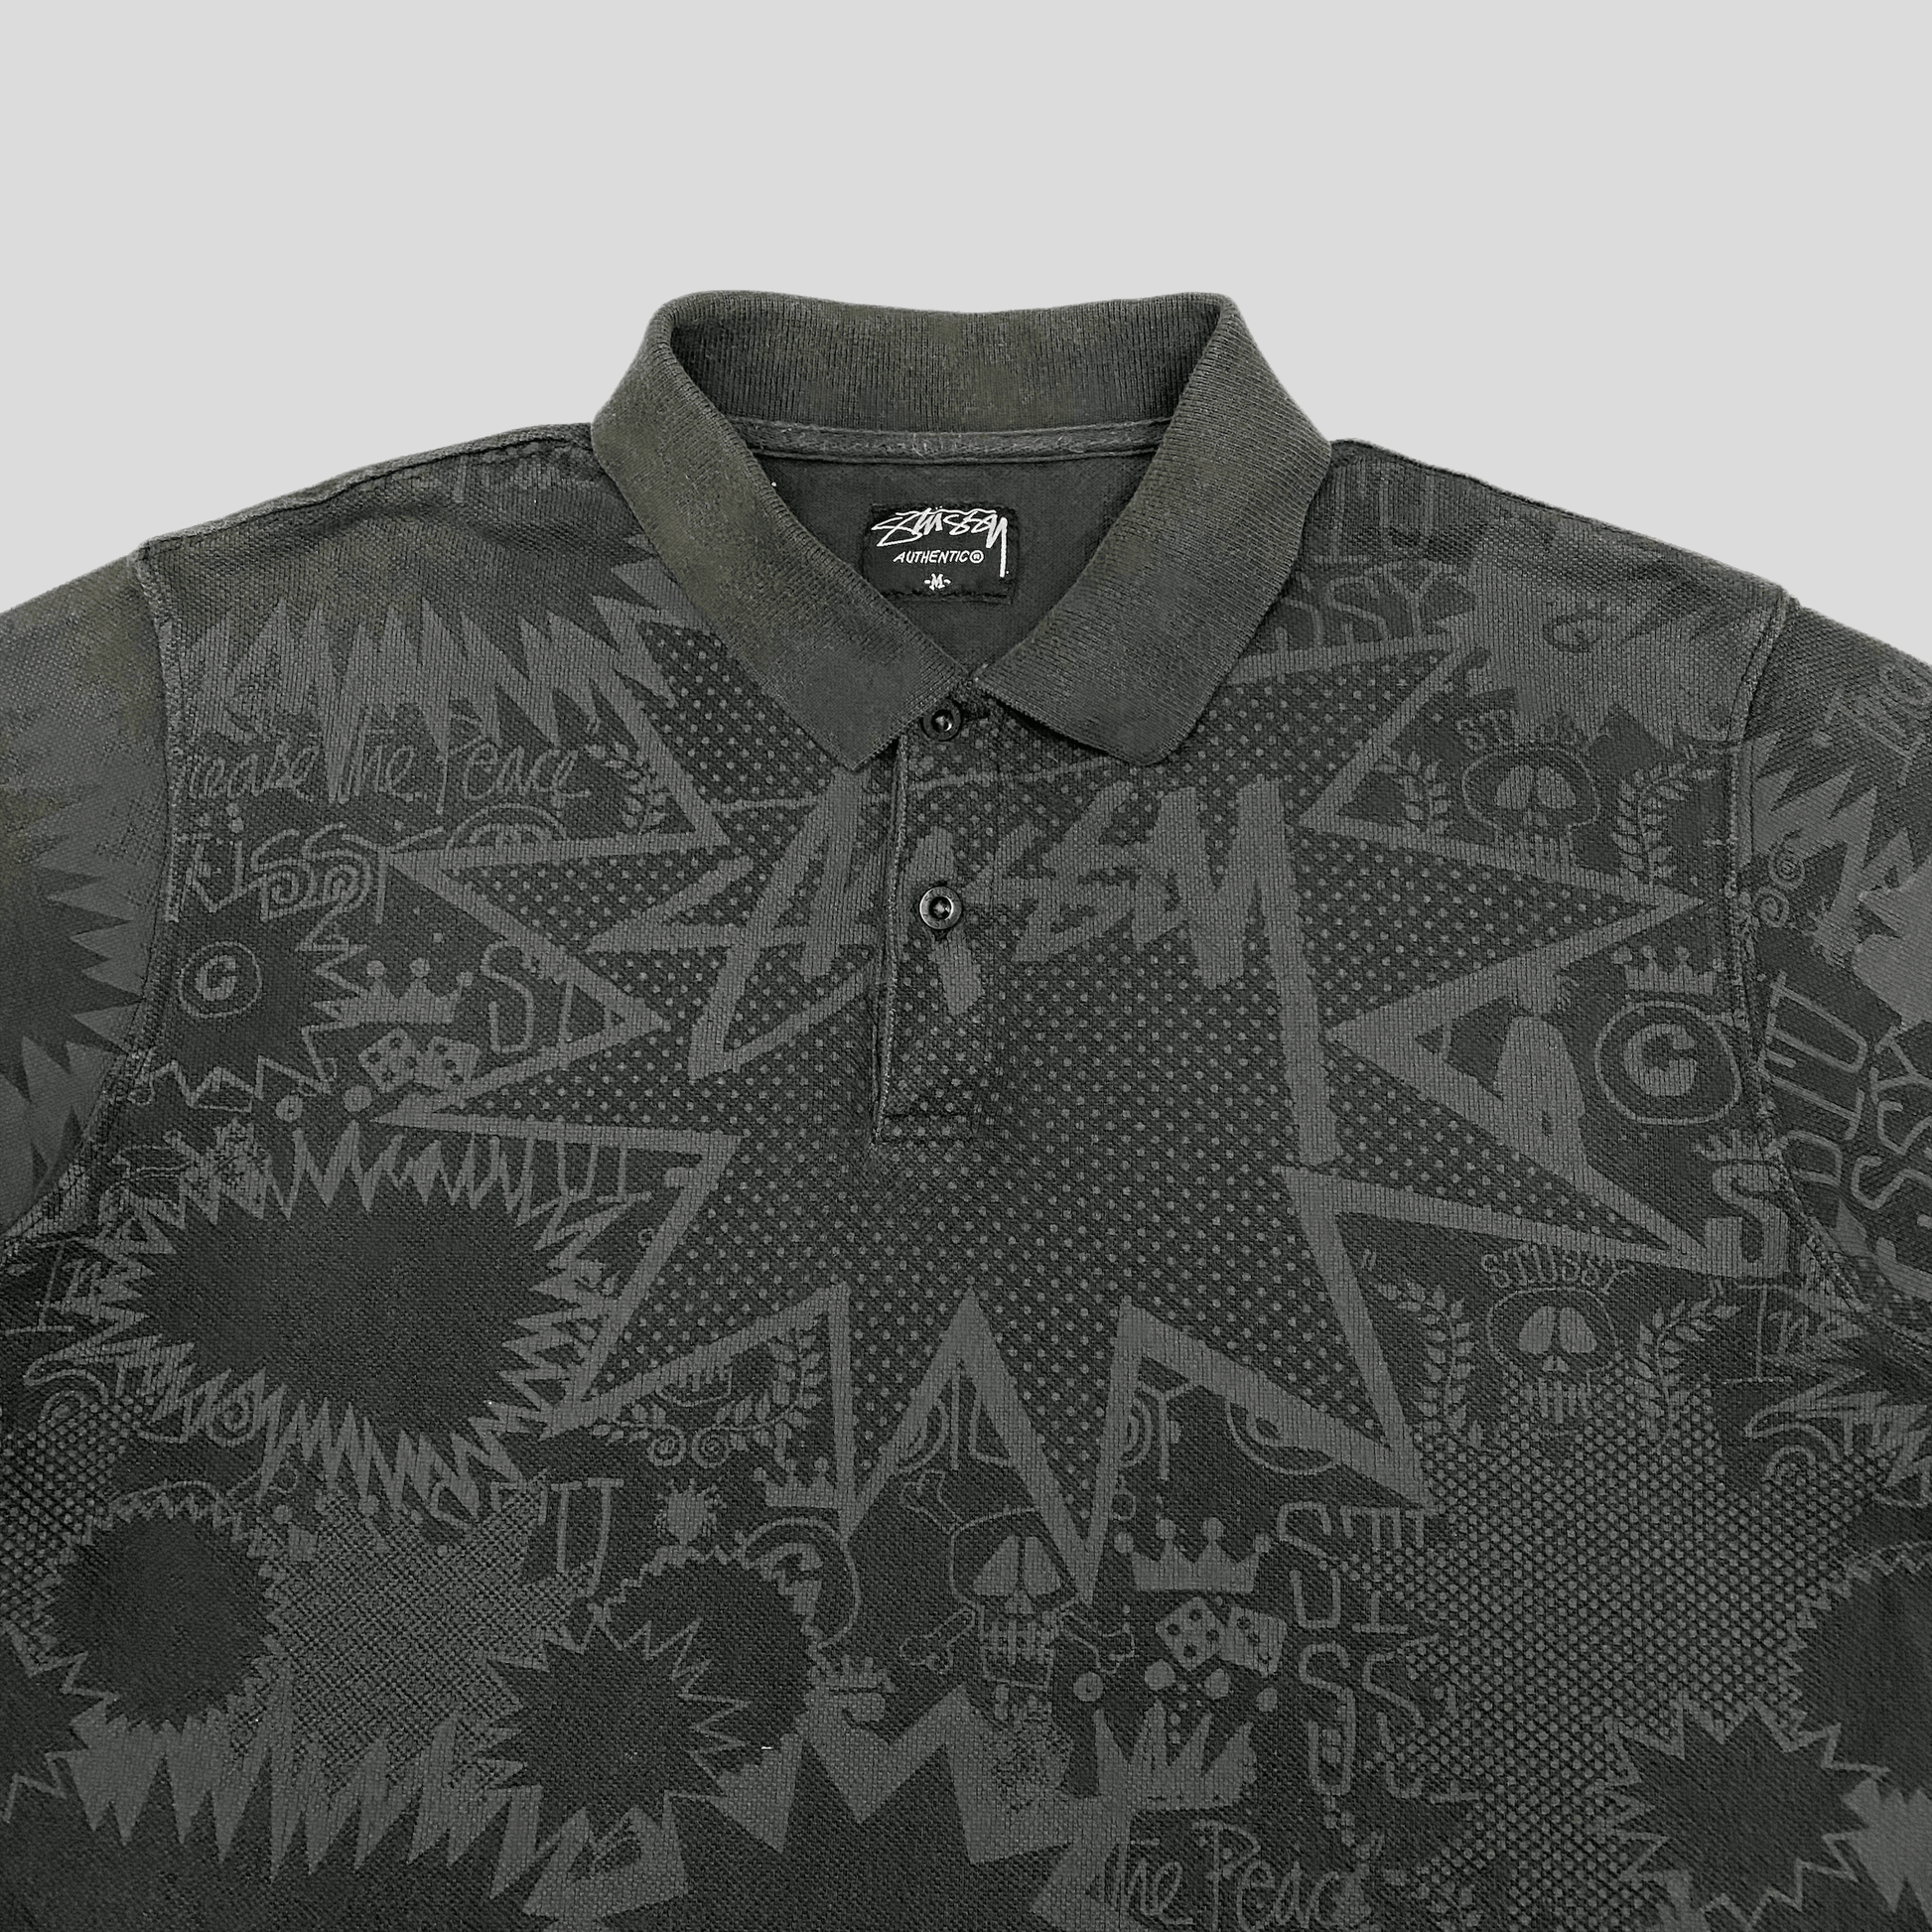 Stussy 00’s Speech Bubble Polo - M - Known Source